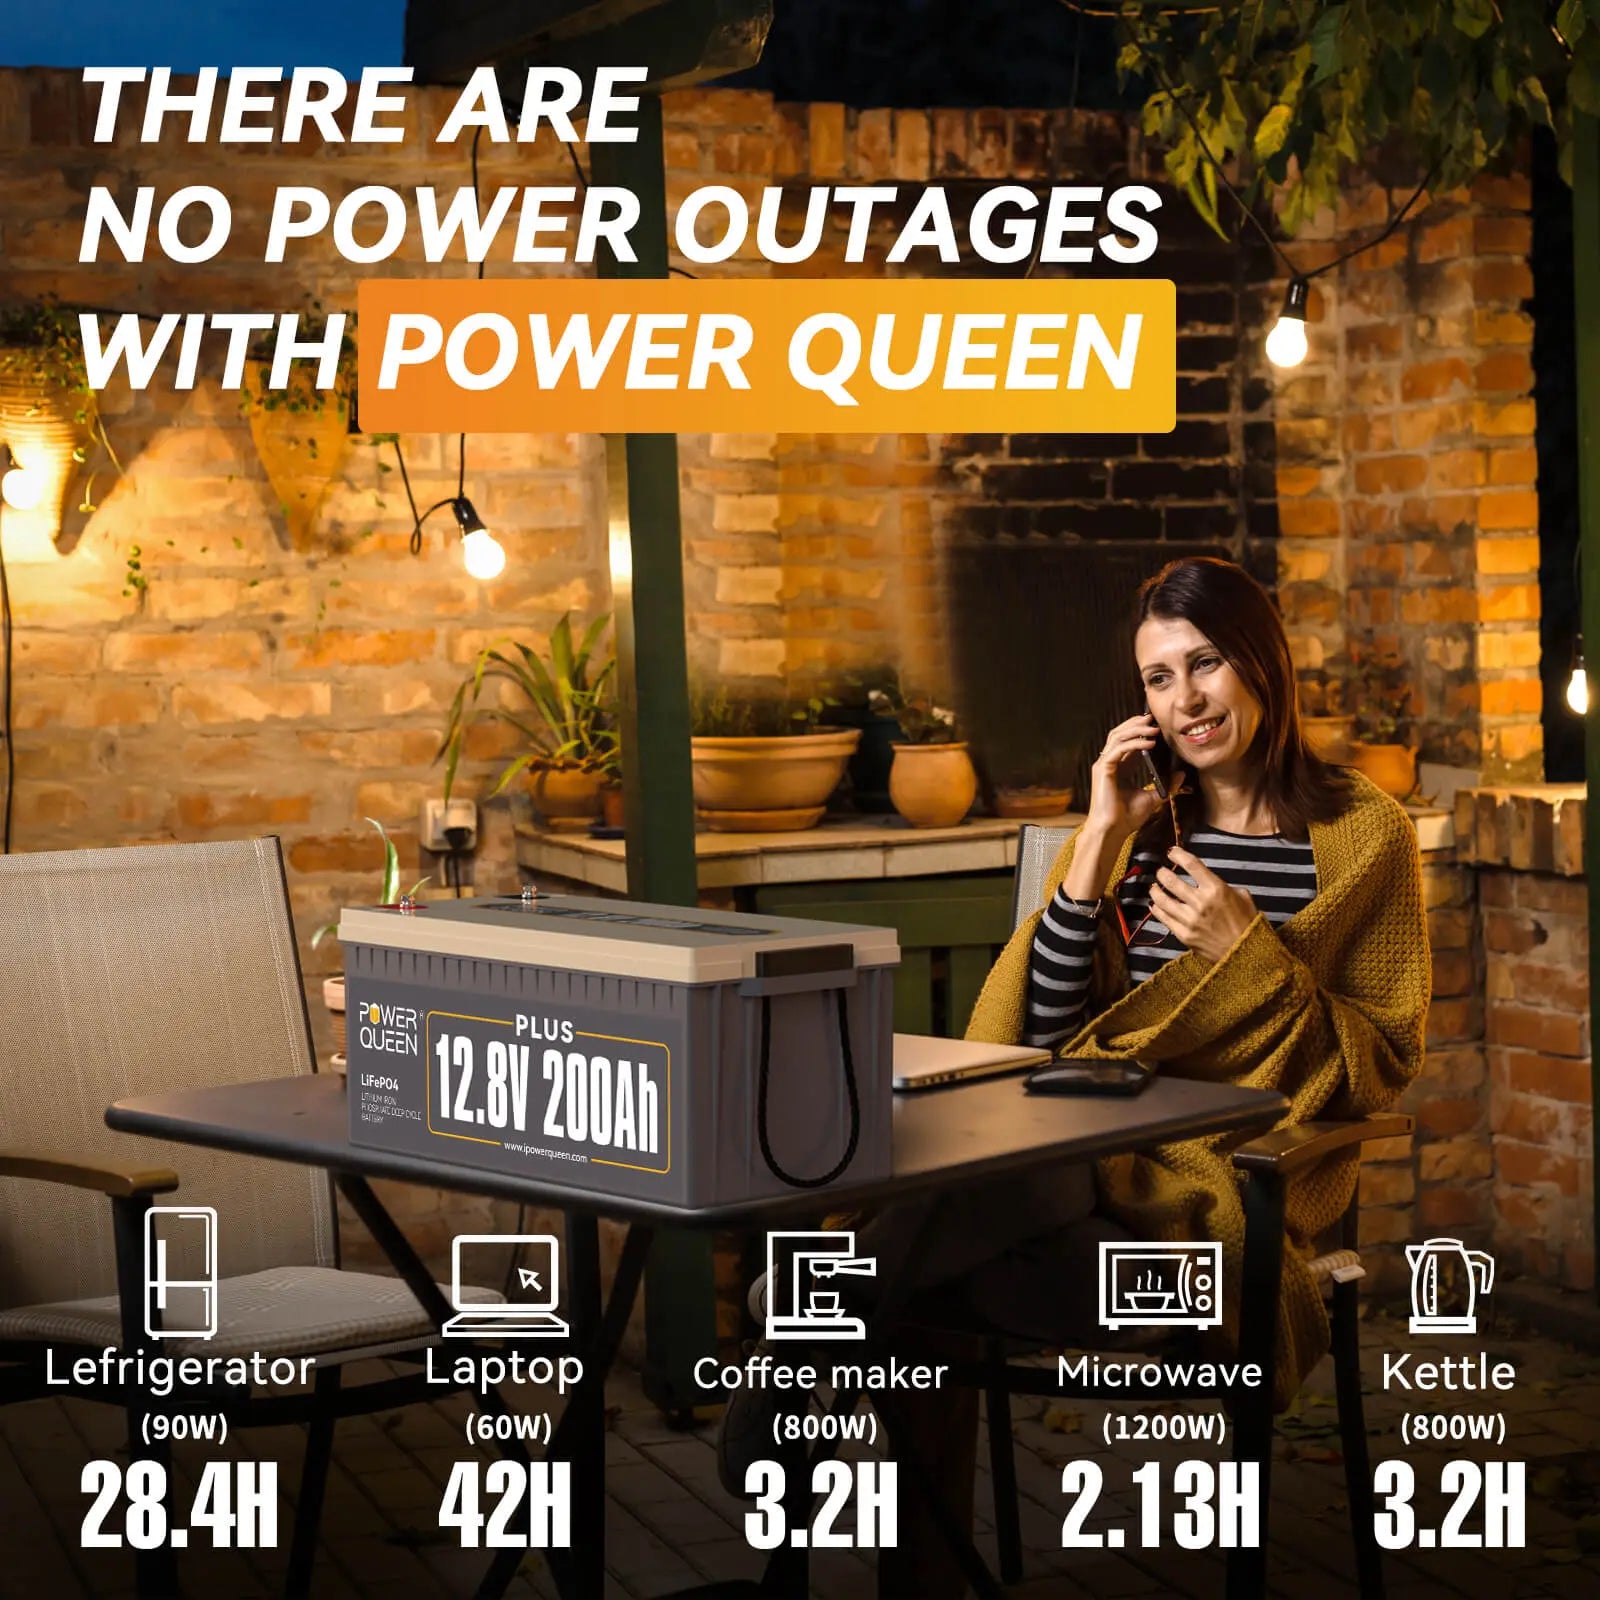 [Only C$904.86]Power Queen 12V 200Ah Plus LiFePO4 Battery + 14.6V 20A Charger